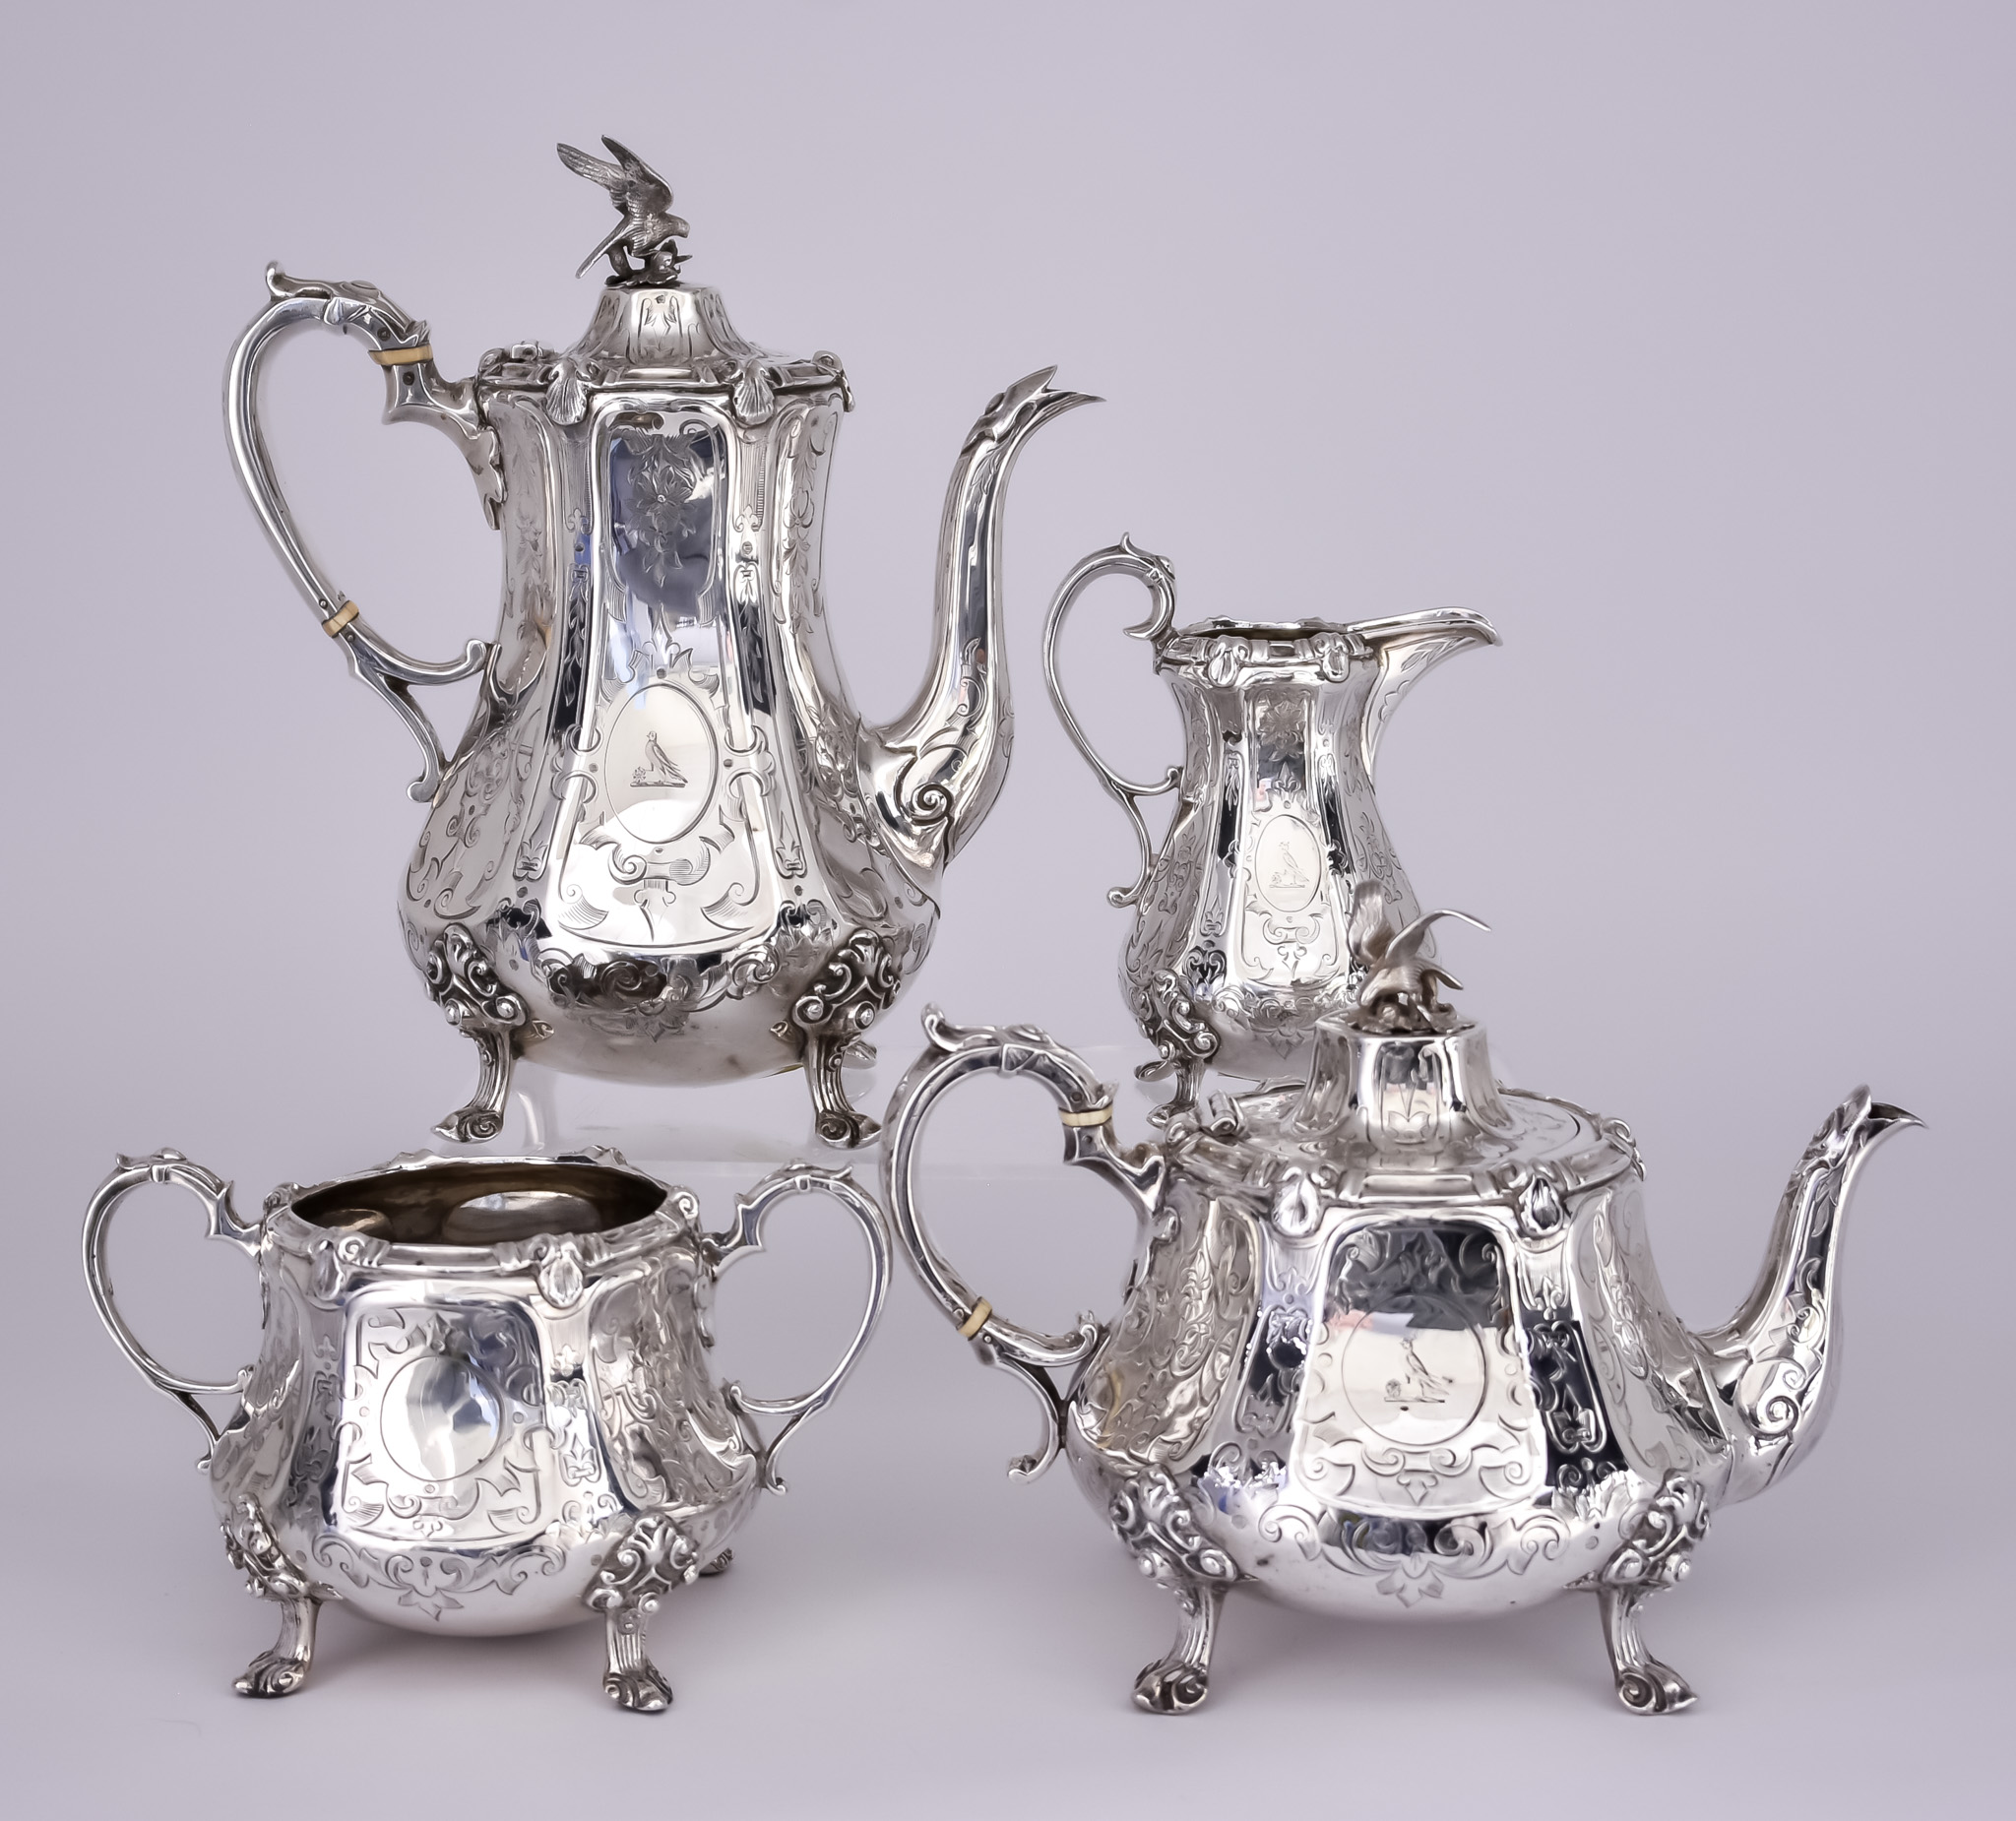 A Victorian Silver Four-Piece Tea and Coffee Service, by William Hunter, London 1852, the baluster